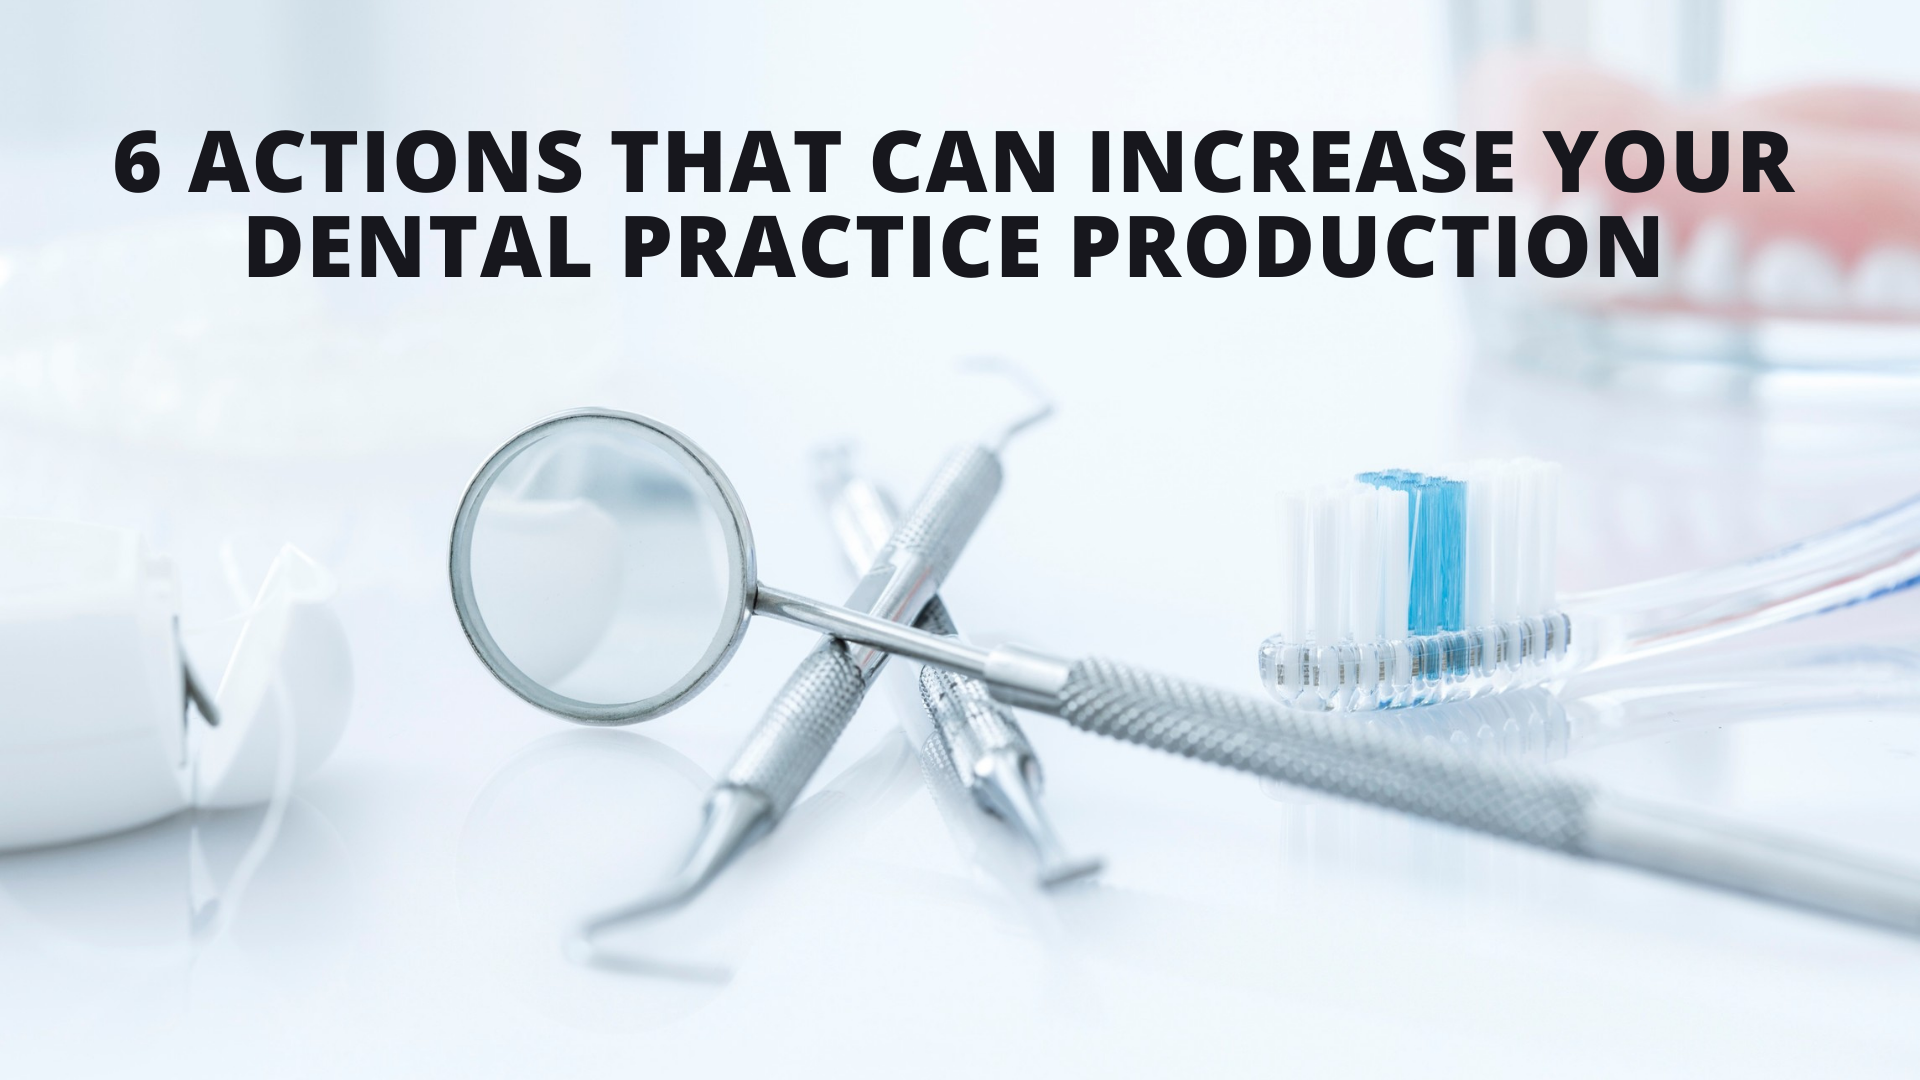 6 Actions That Can Increase Dental Practice Production